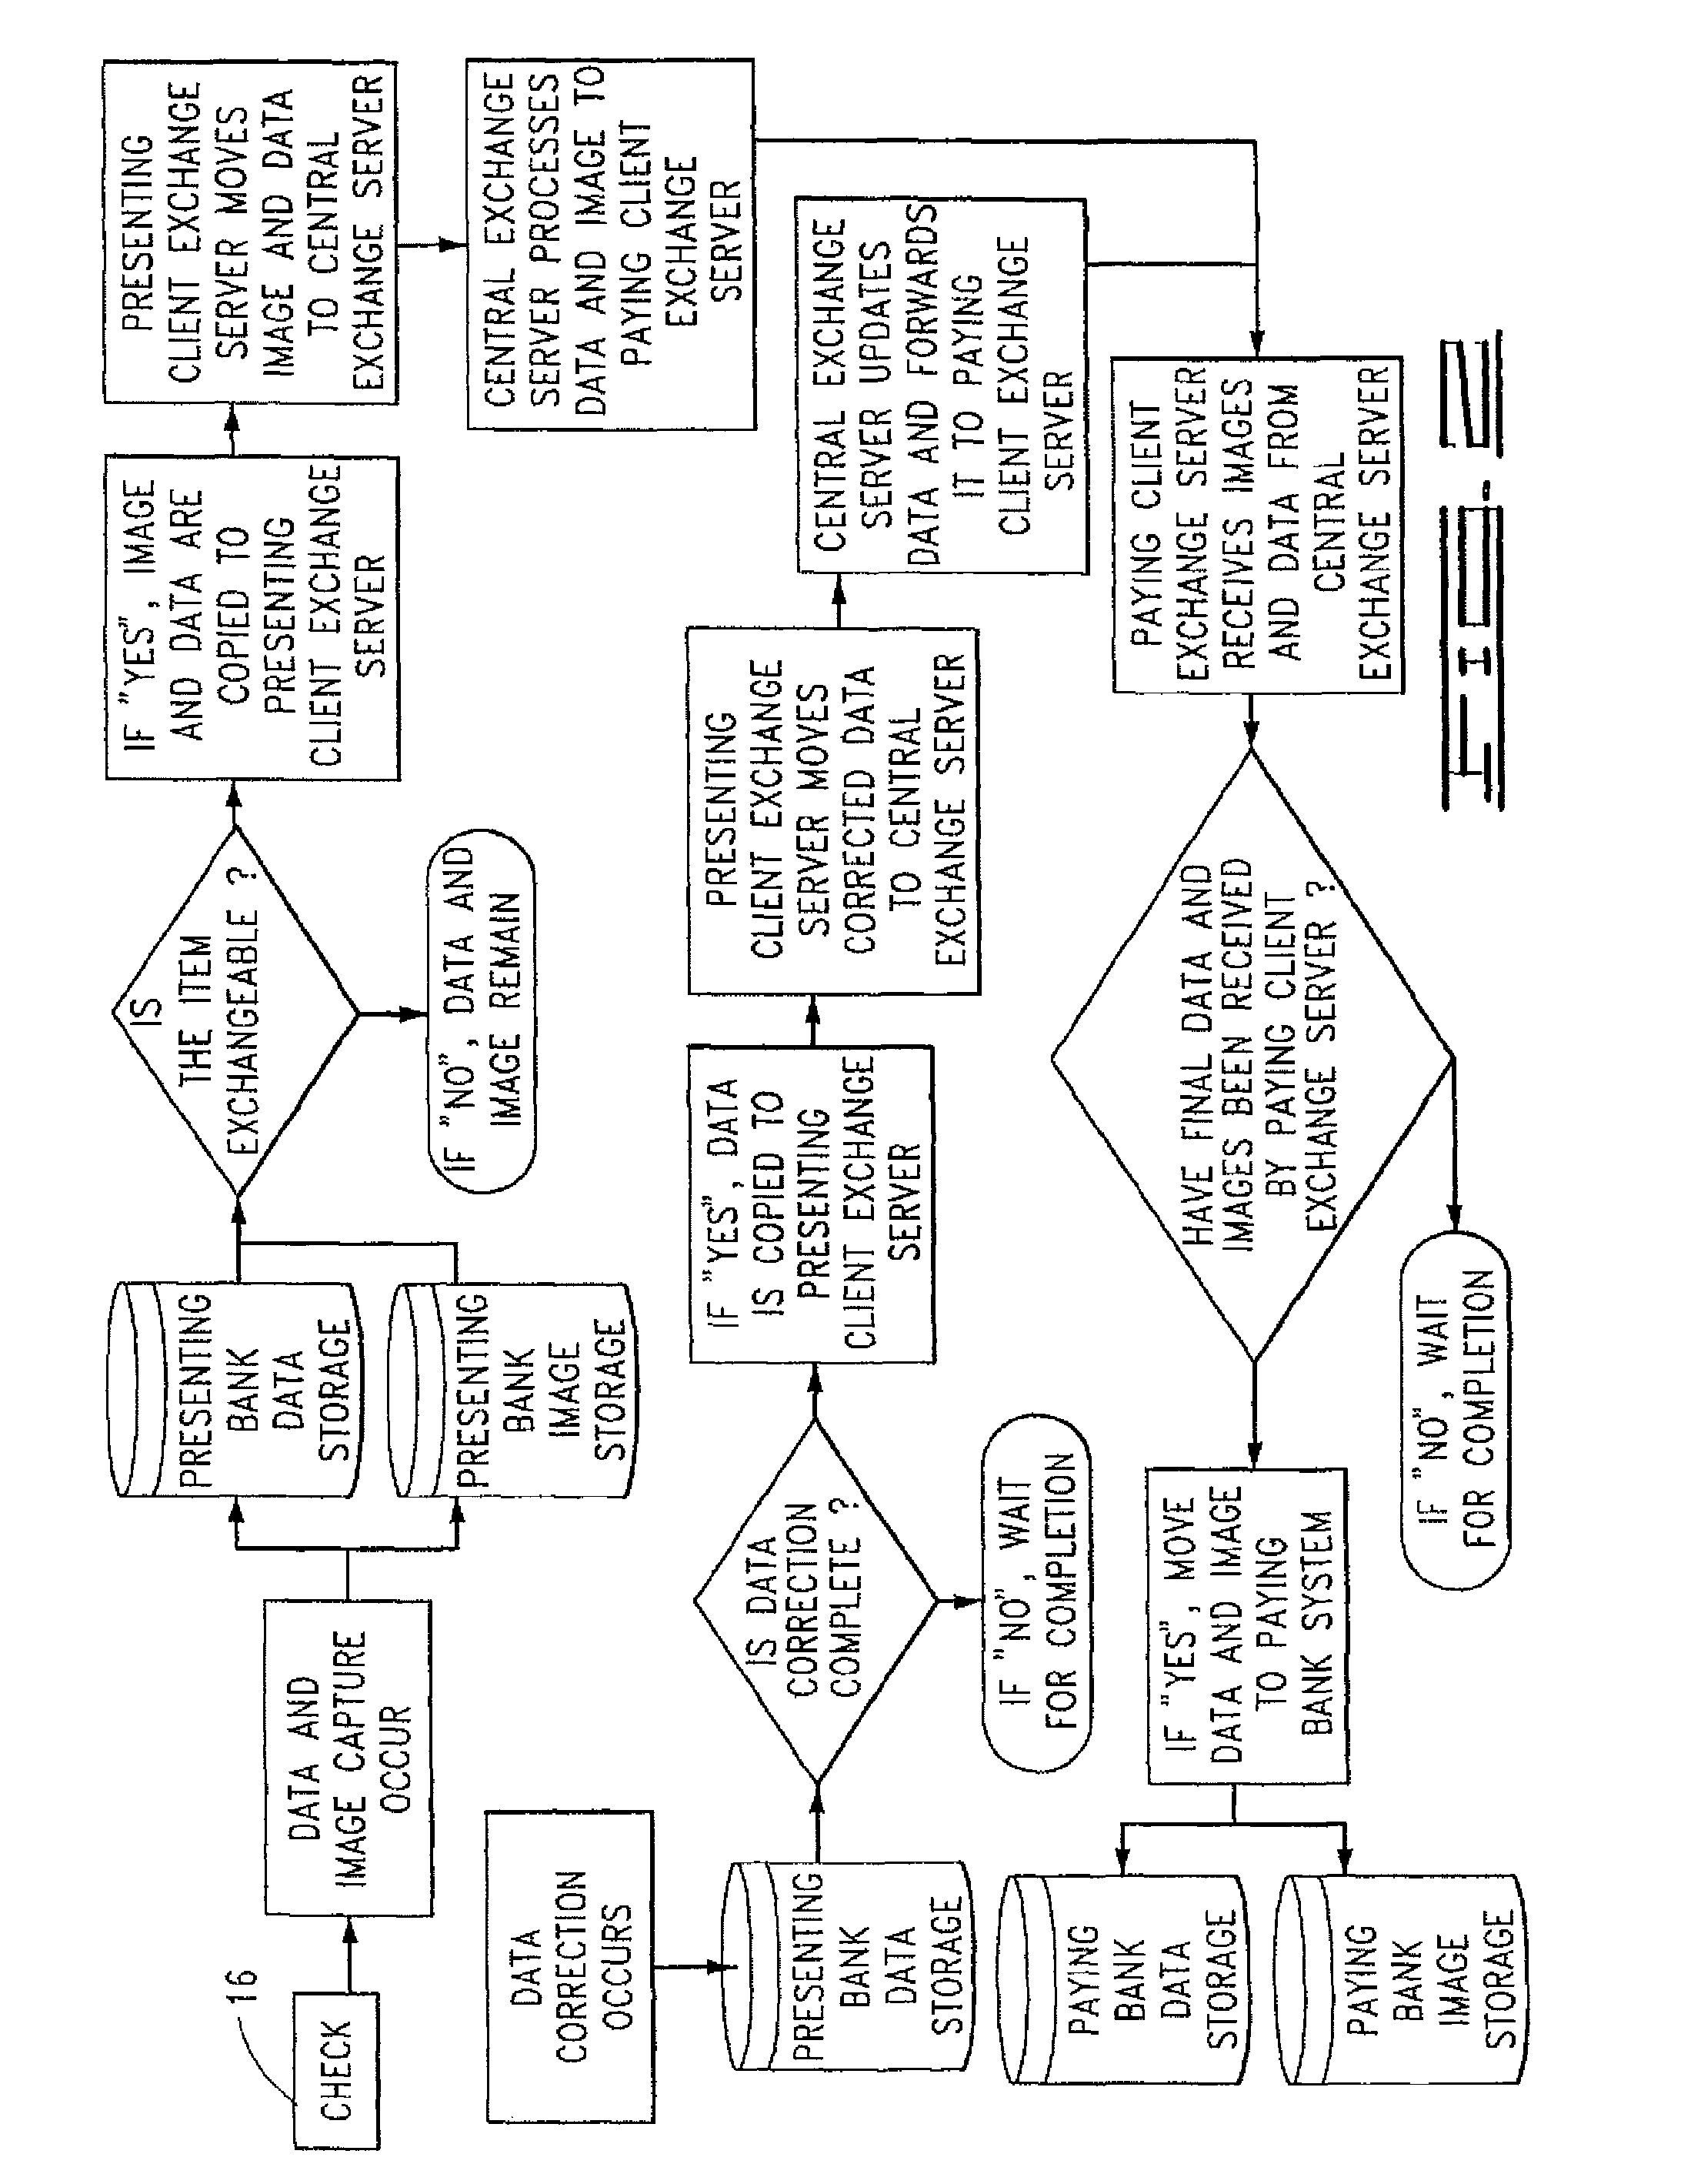 Real time financial instrument image exchange system and method